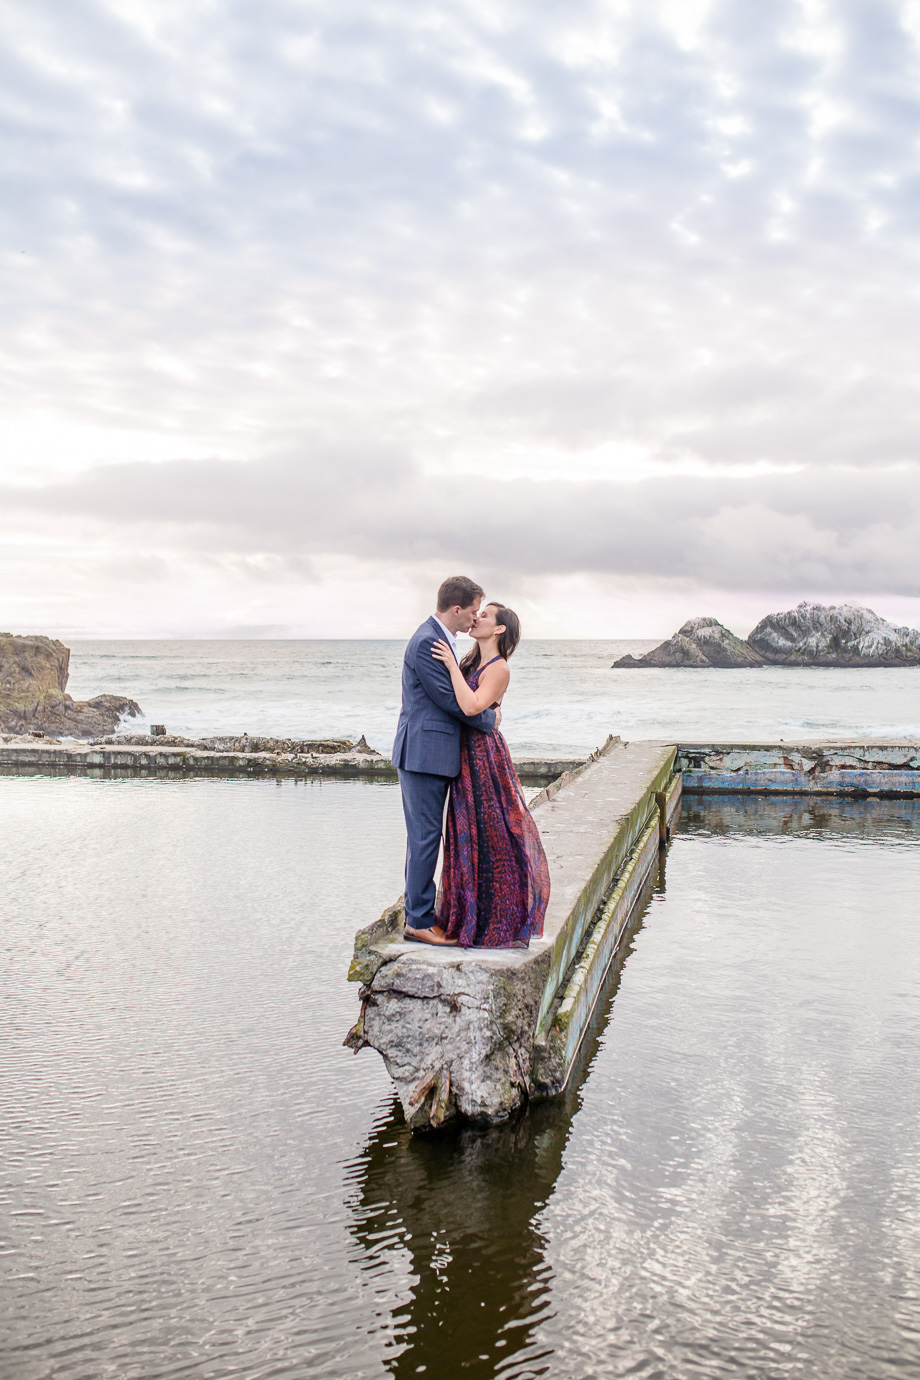 ultra romantic engagement photo at Sutro Baths with reflection